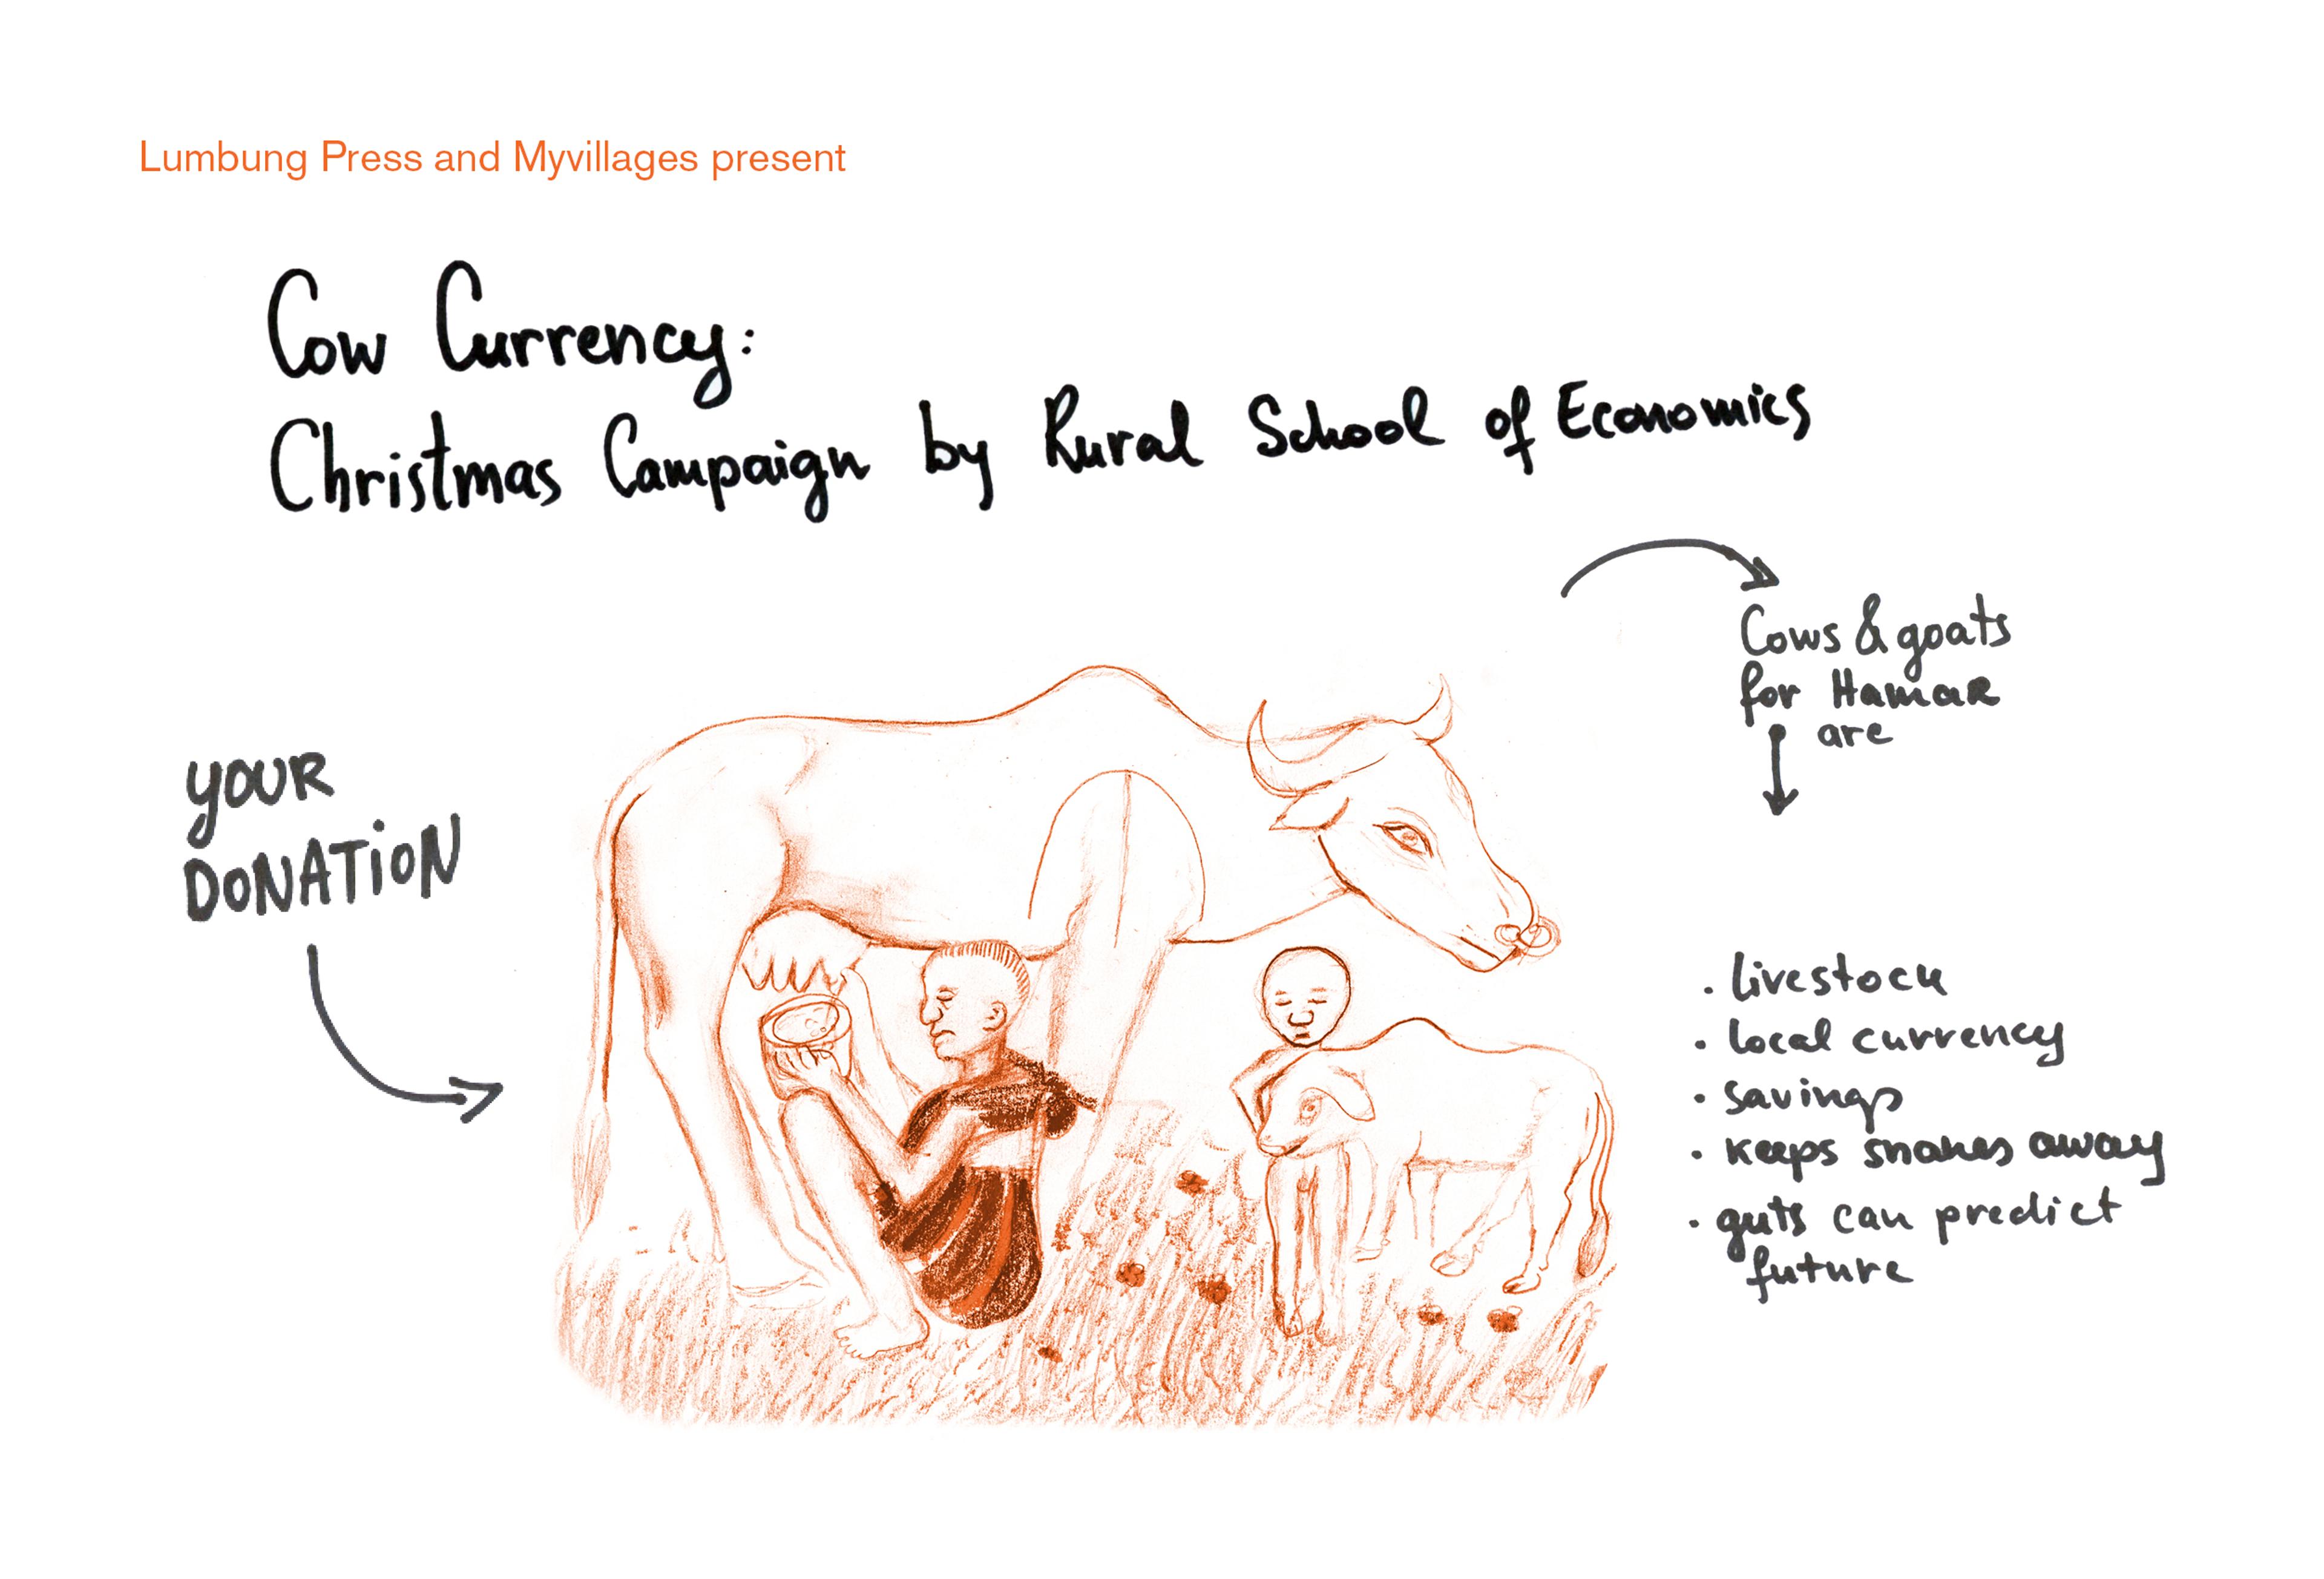 Texts : Cow Currency: Christmas Campaign 